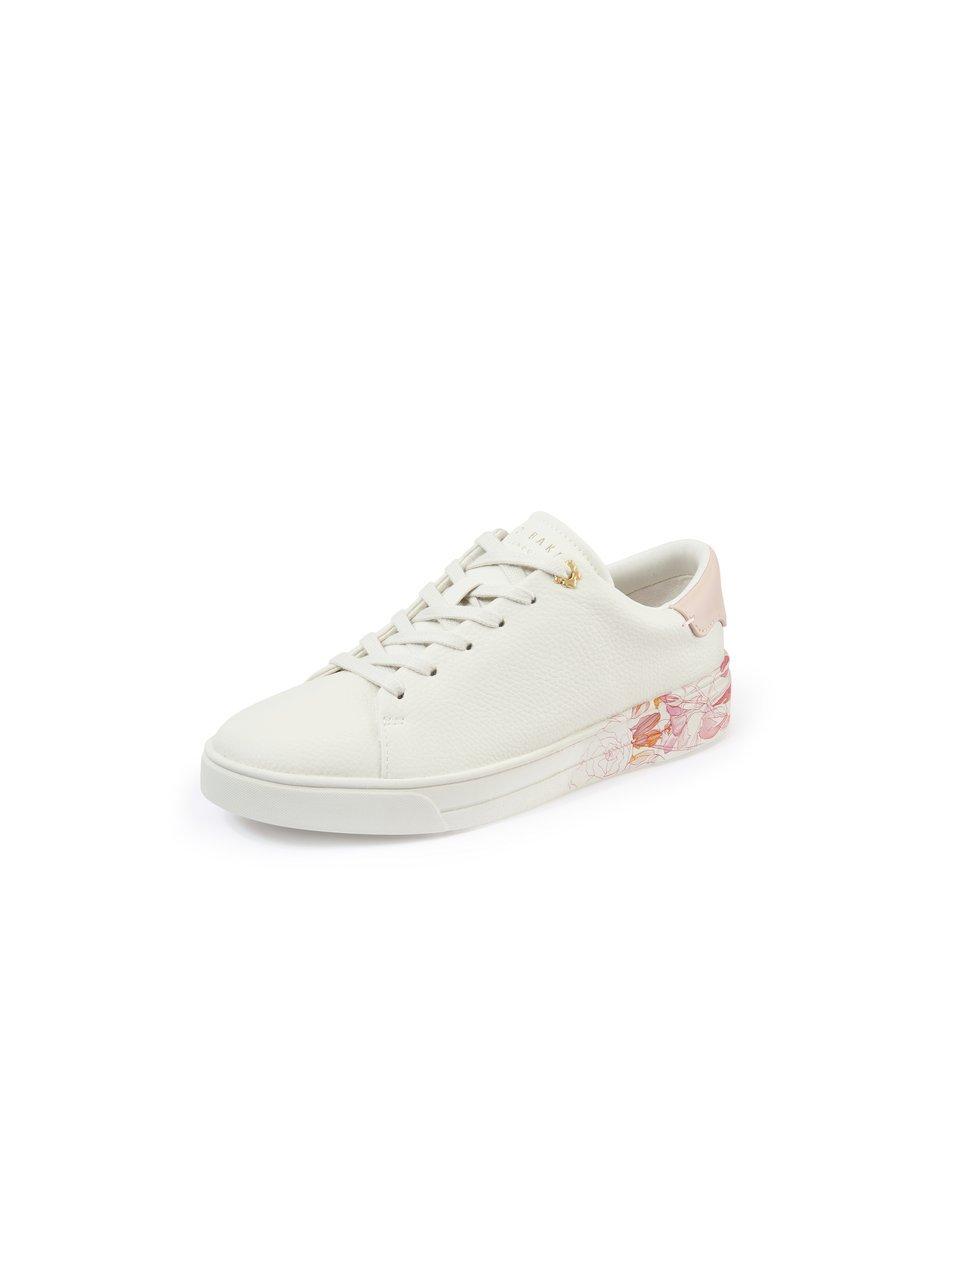 Ted - Sneakers - off-white/pale